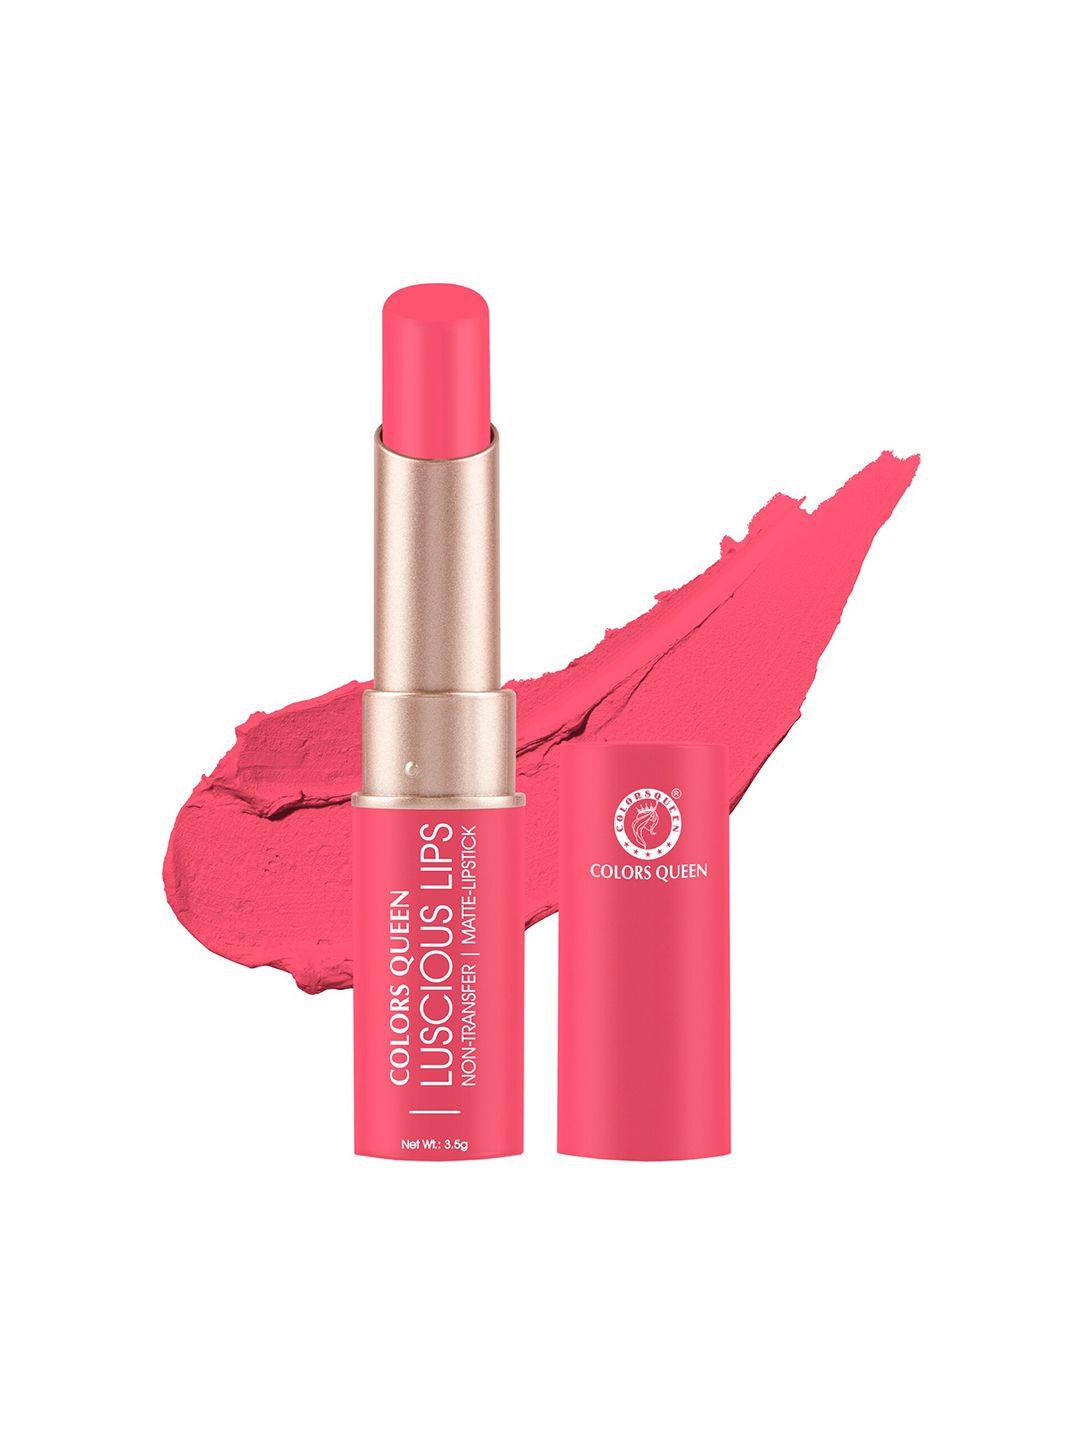 colors queen luscious lips non transfer matte lipstick 3.5g - brink of pink 07